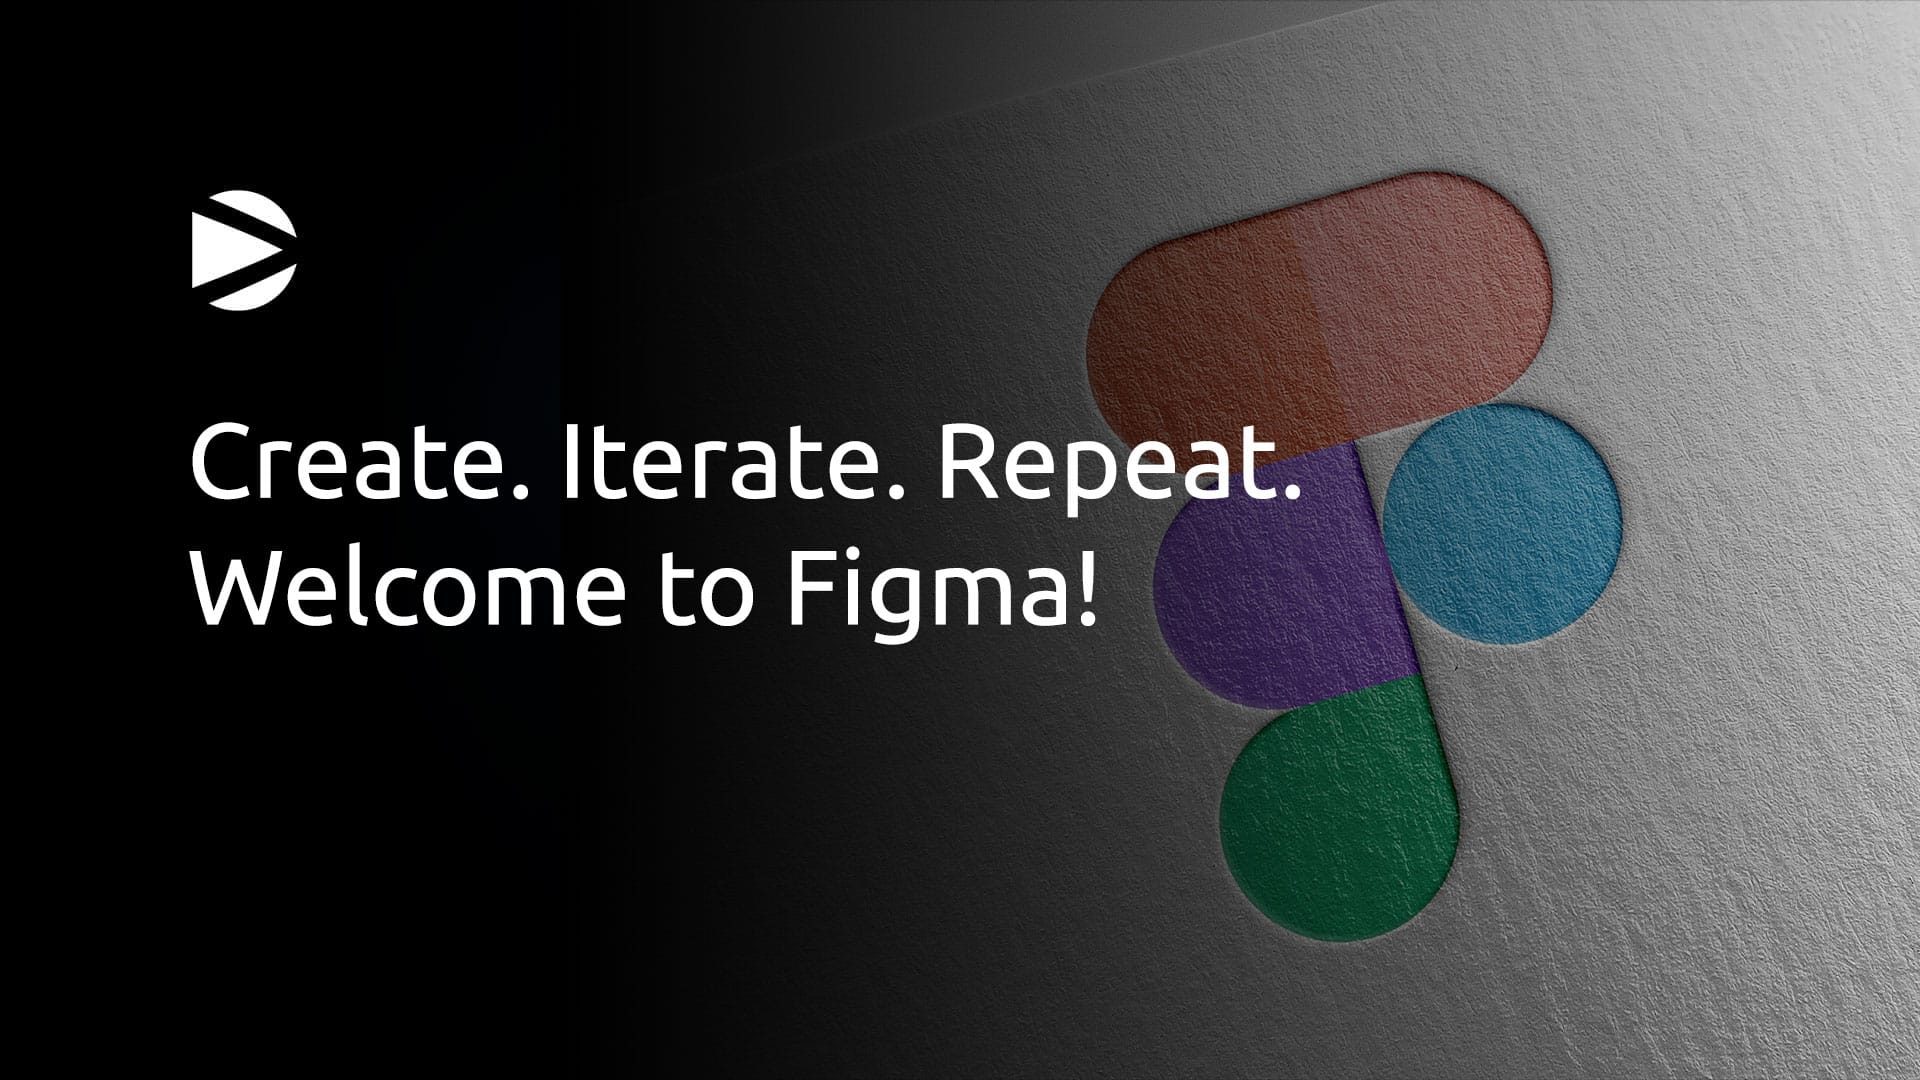 DNAMIC - Figma and its benefits